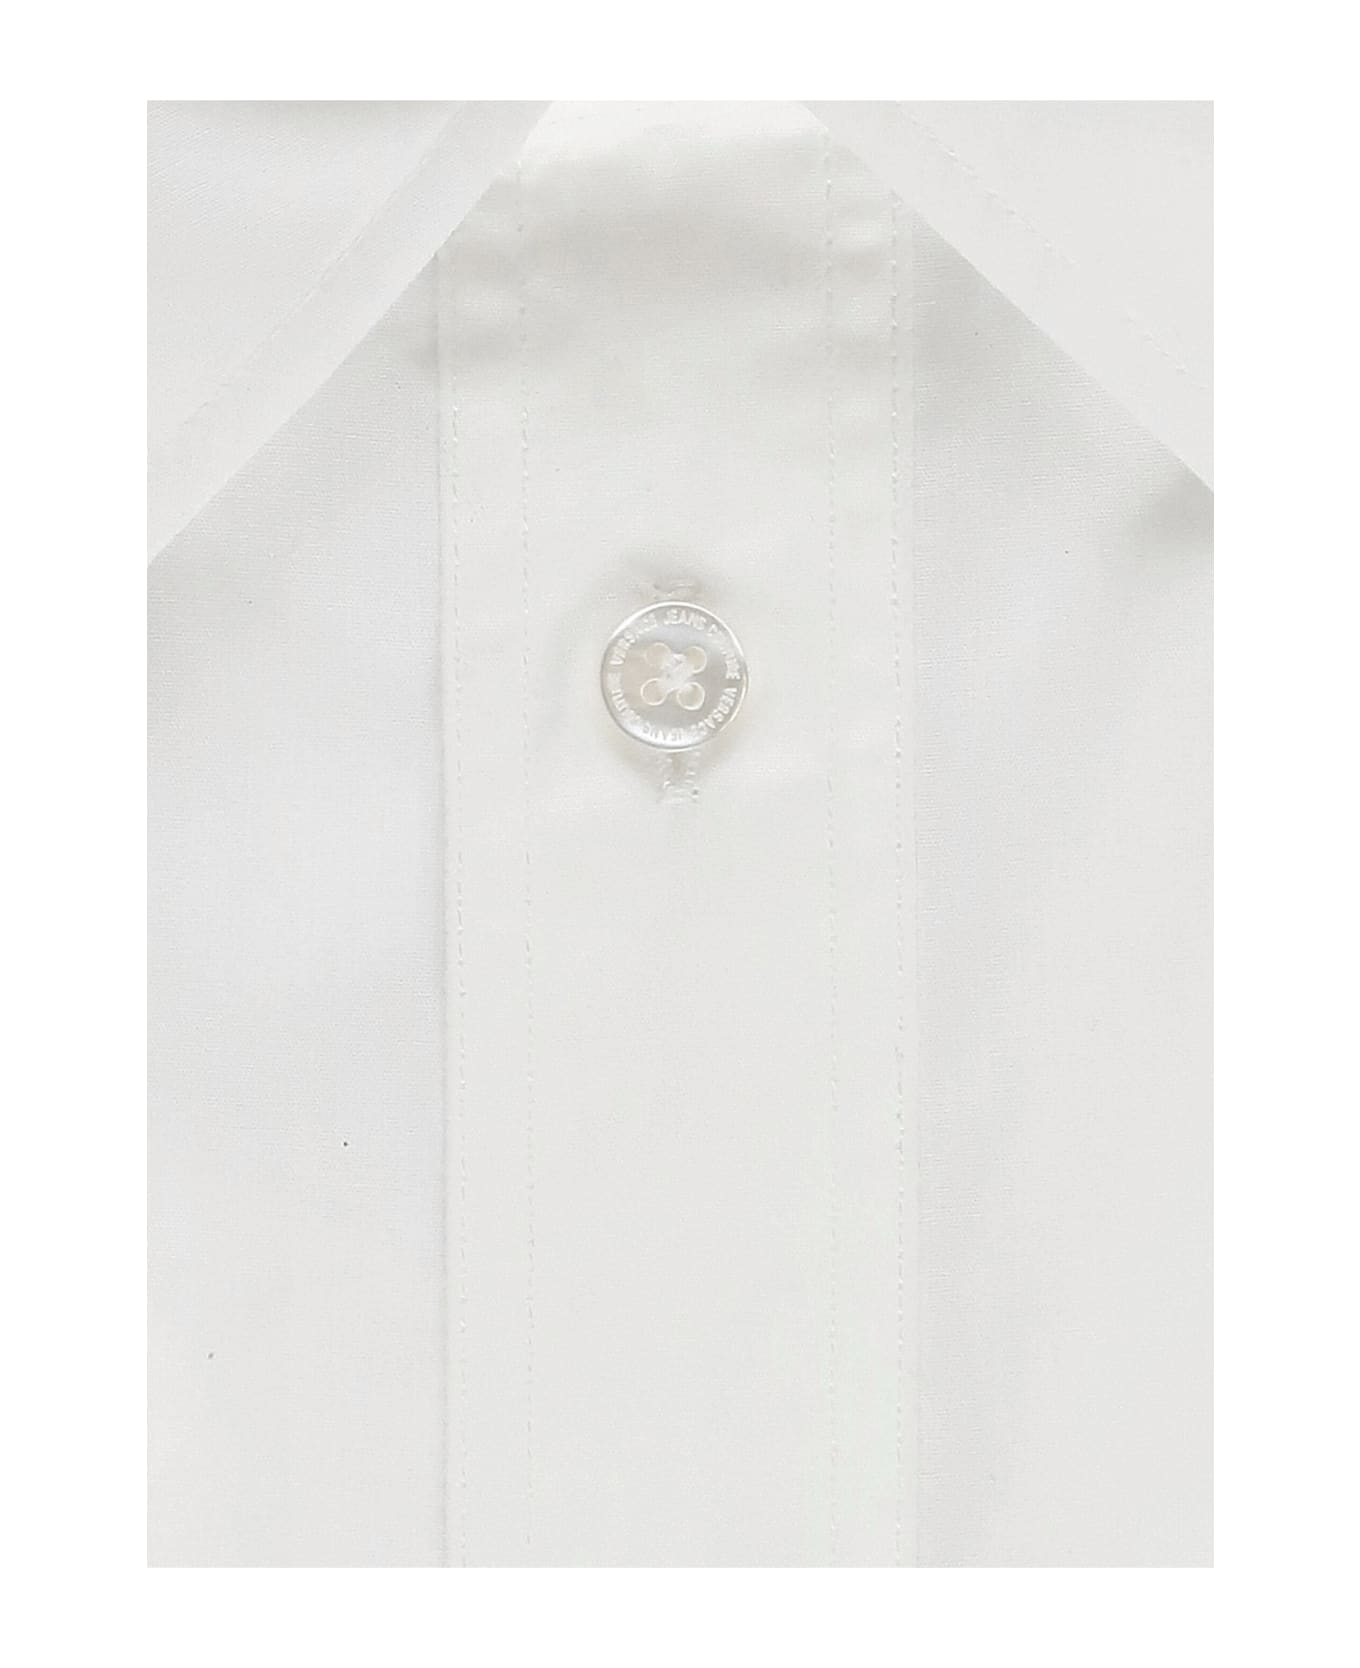 Versace Jeans Couture Shirt - White シャツ